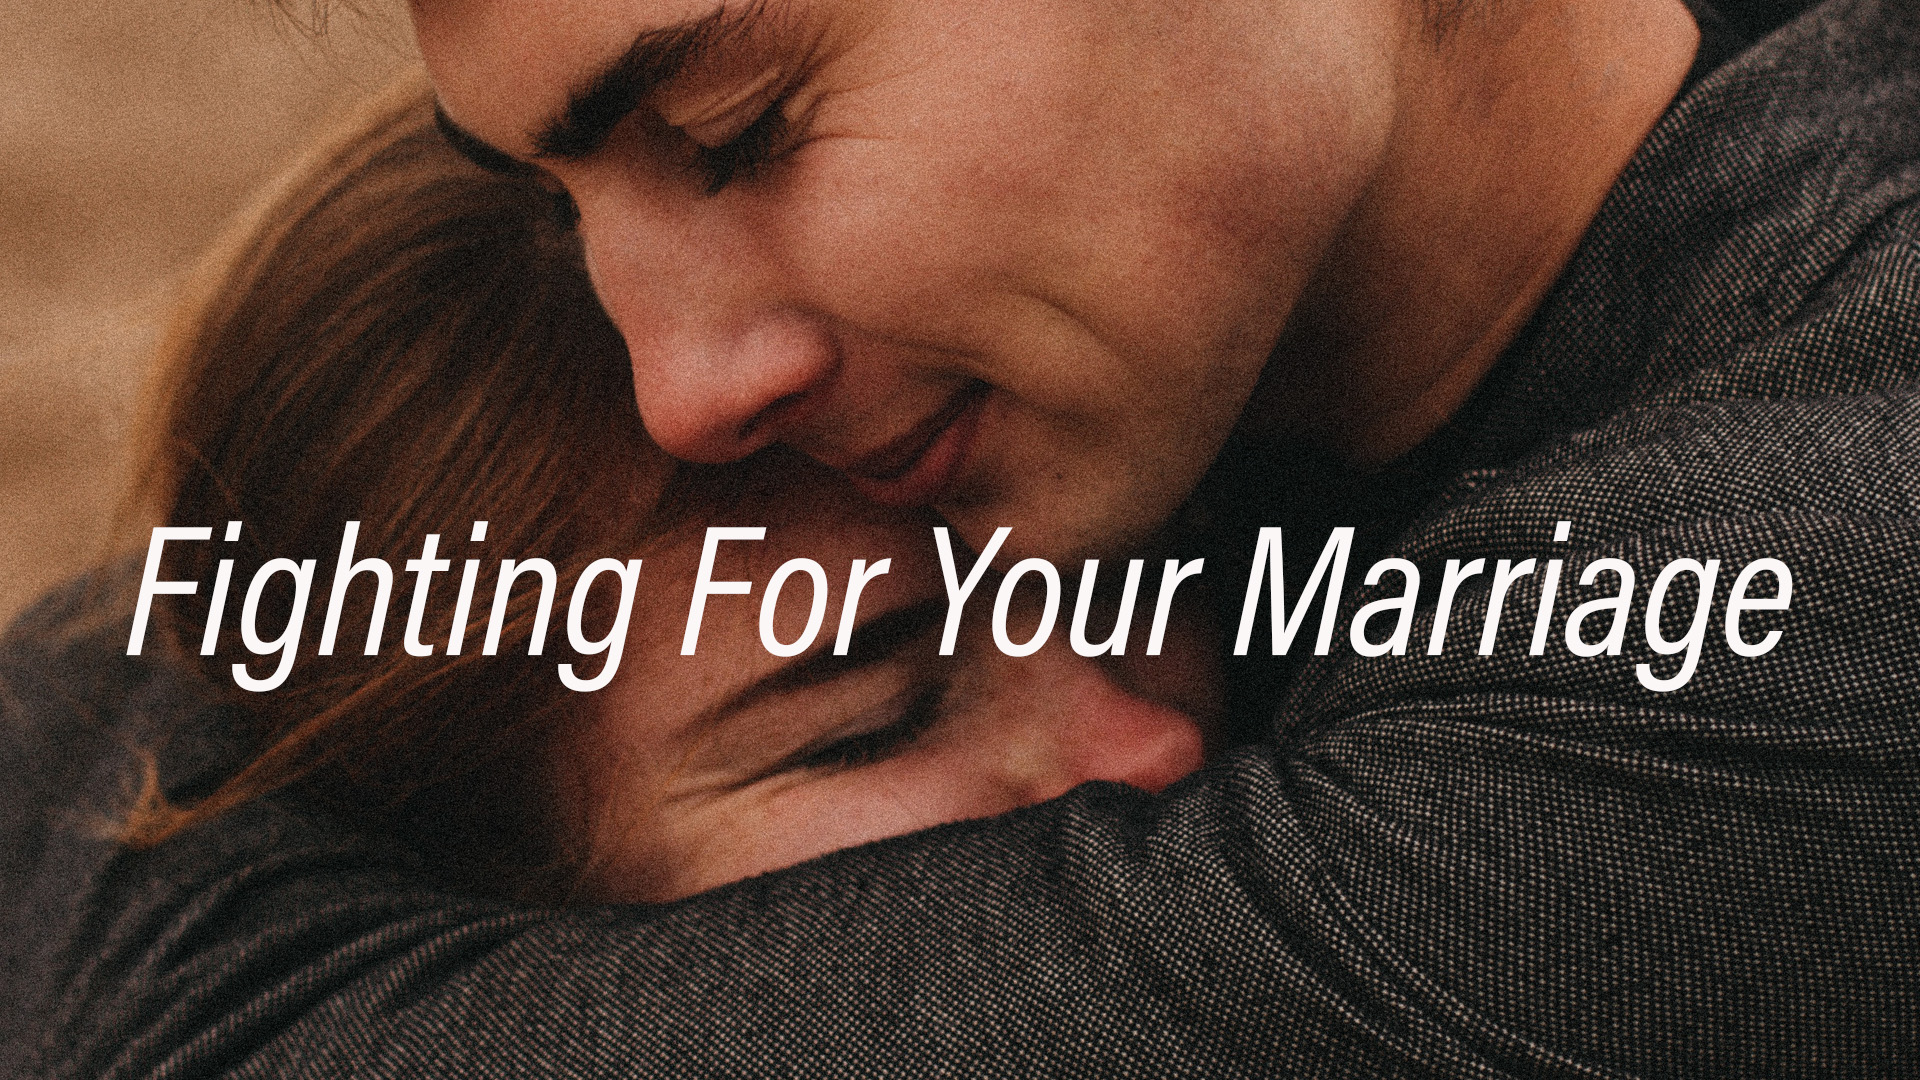 Fighting For Your Marriage | 101

5-Week Series 
Next session to be determined
